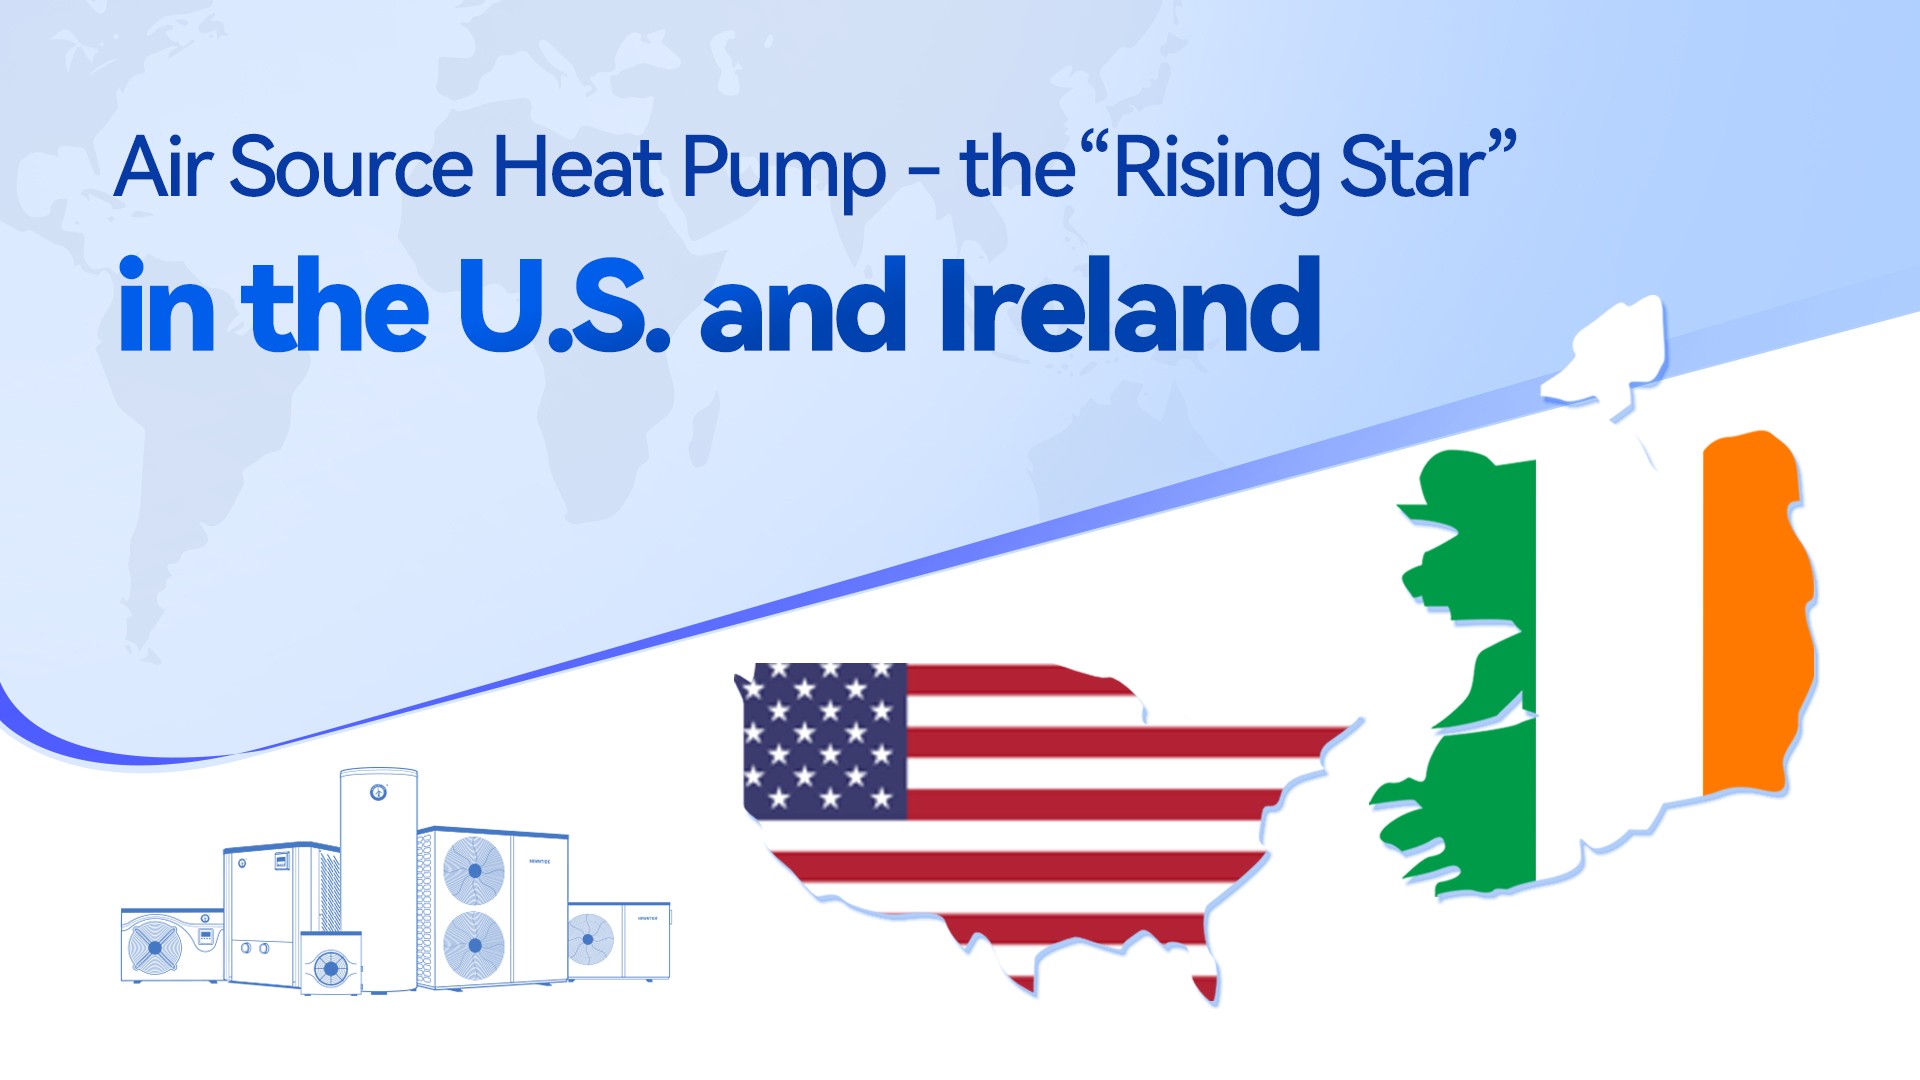 How is Heat Pump in the U.S. and Ireland